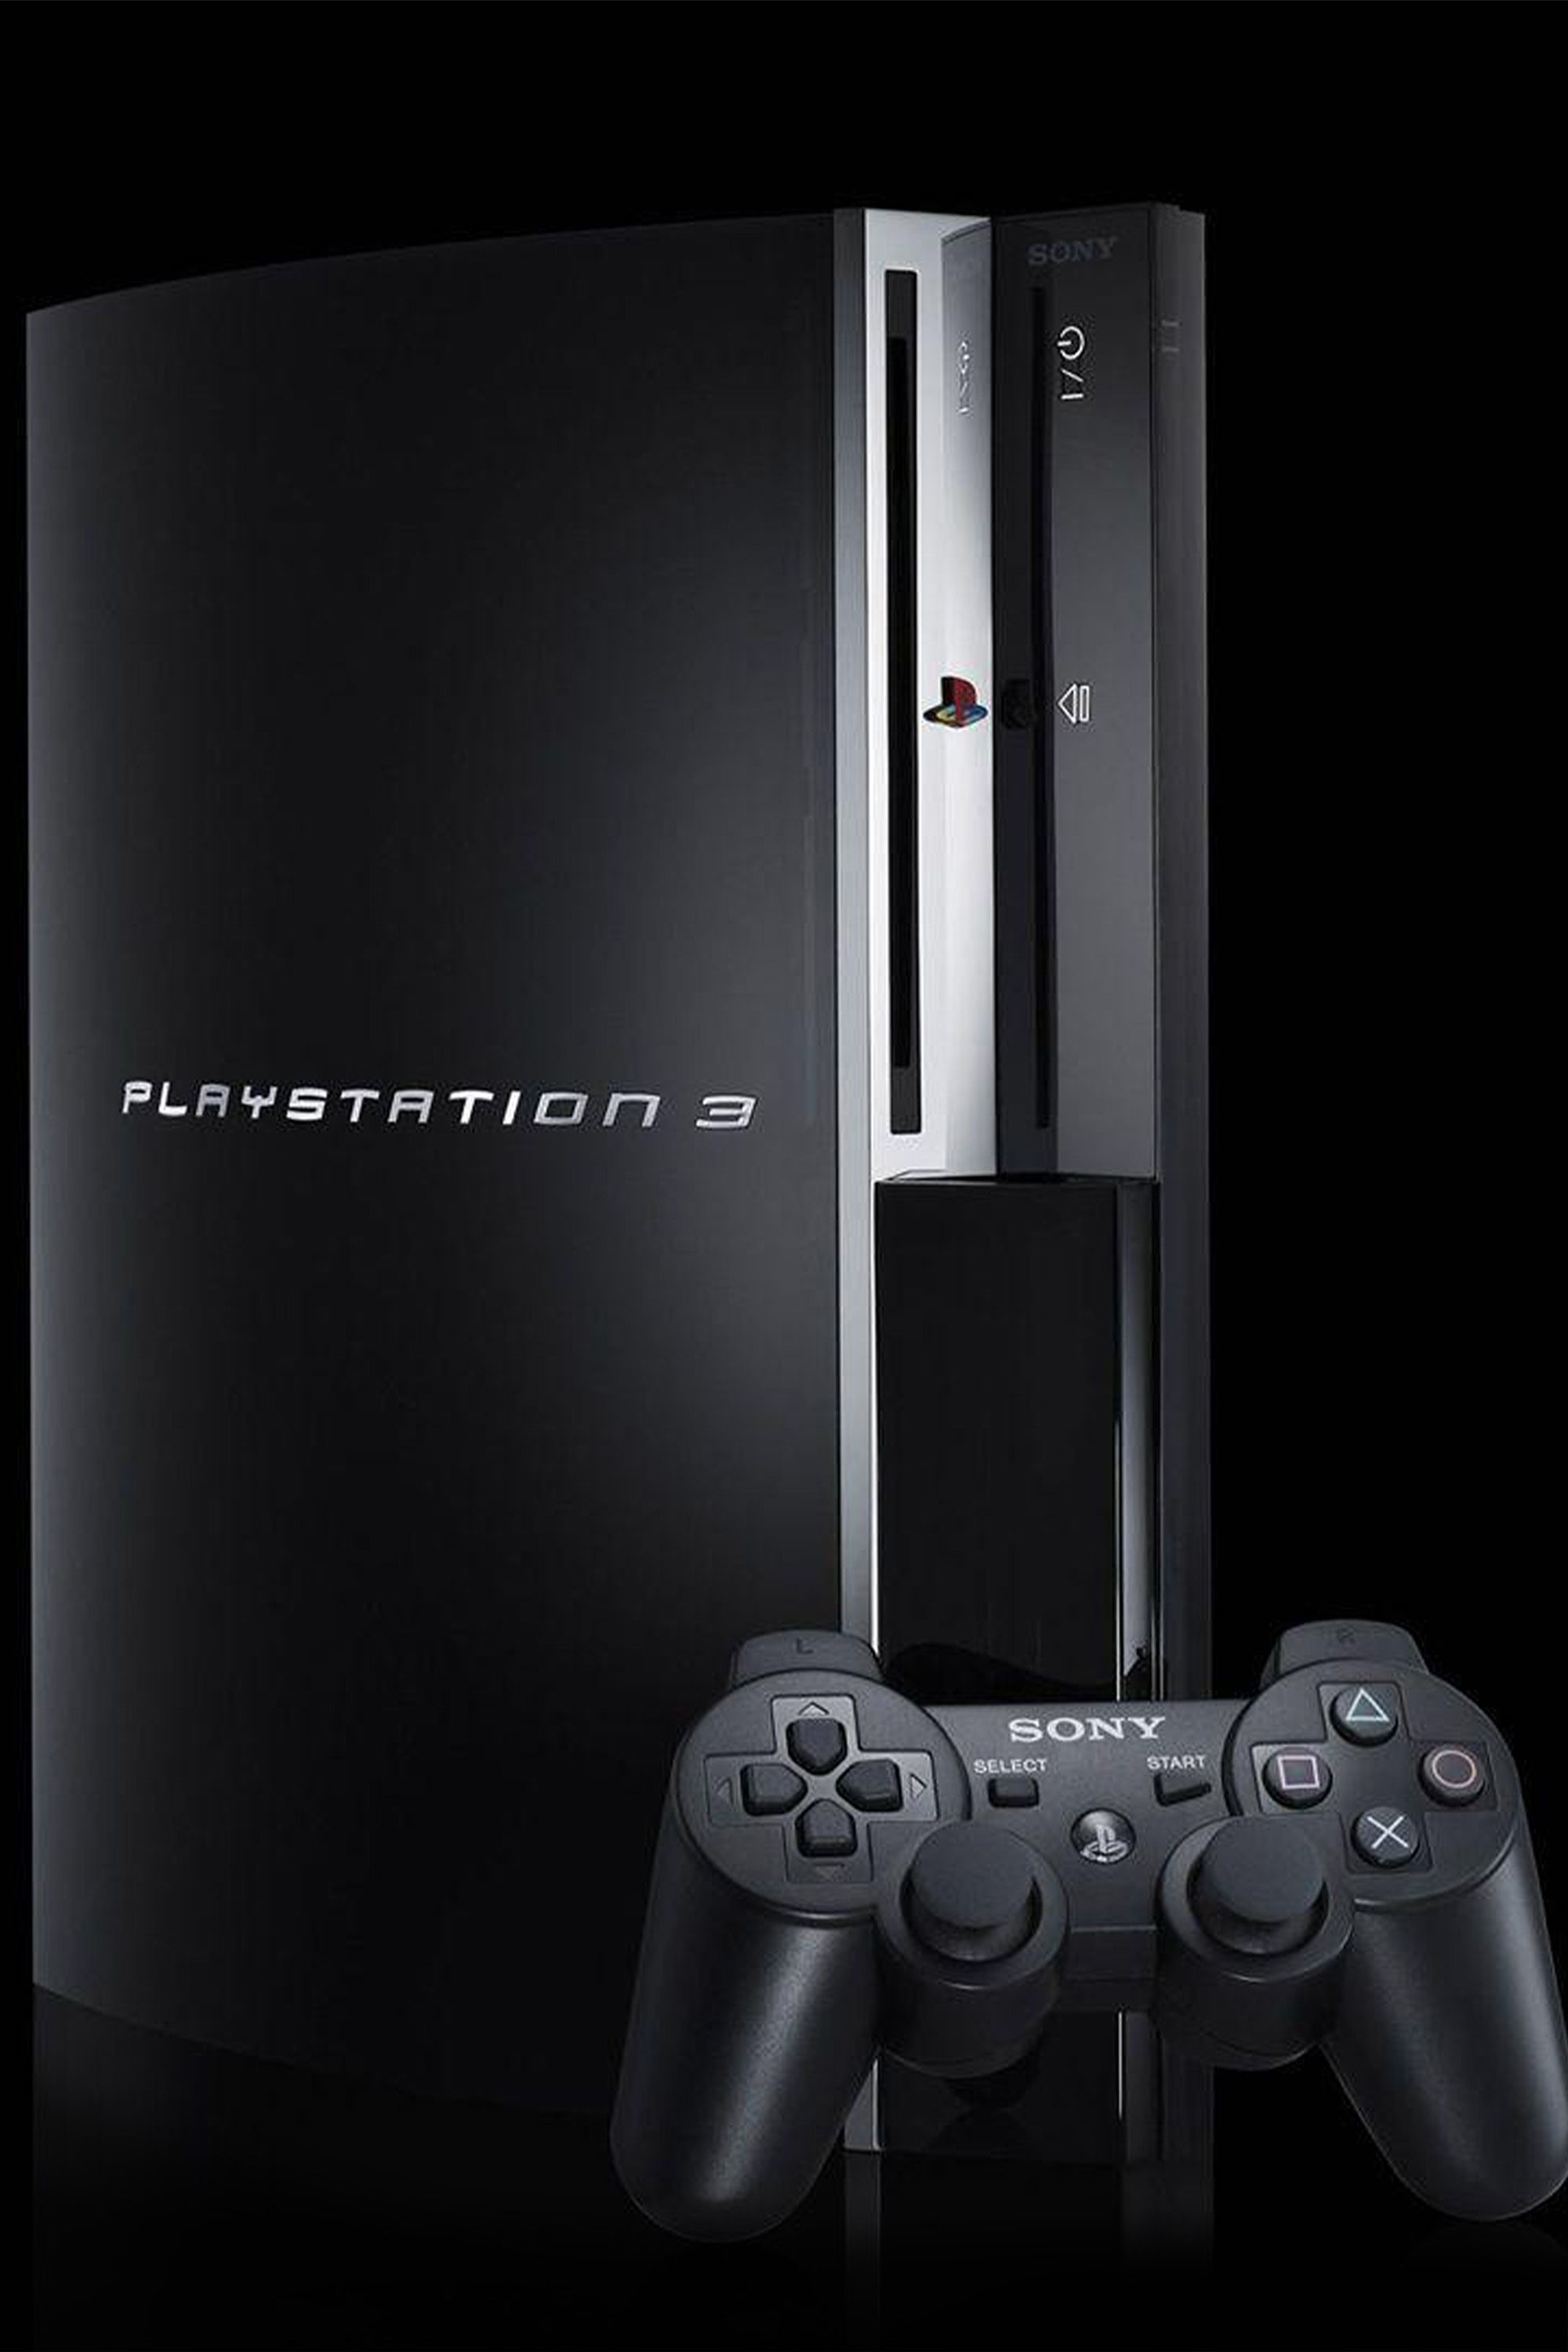 playstation 3 sony console game platform